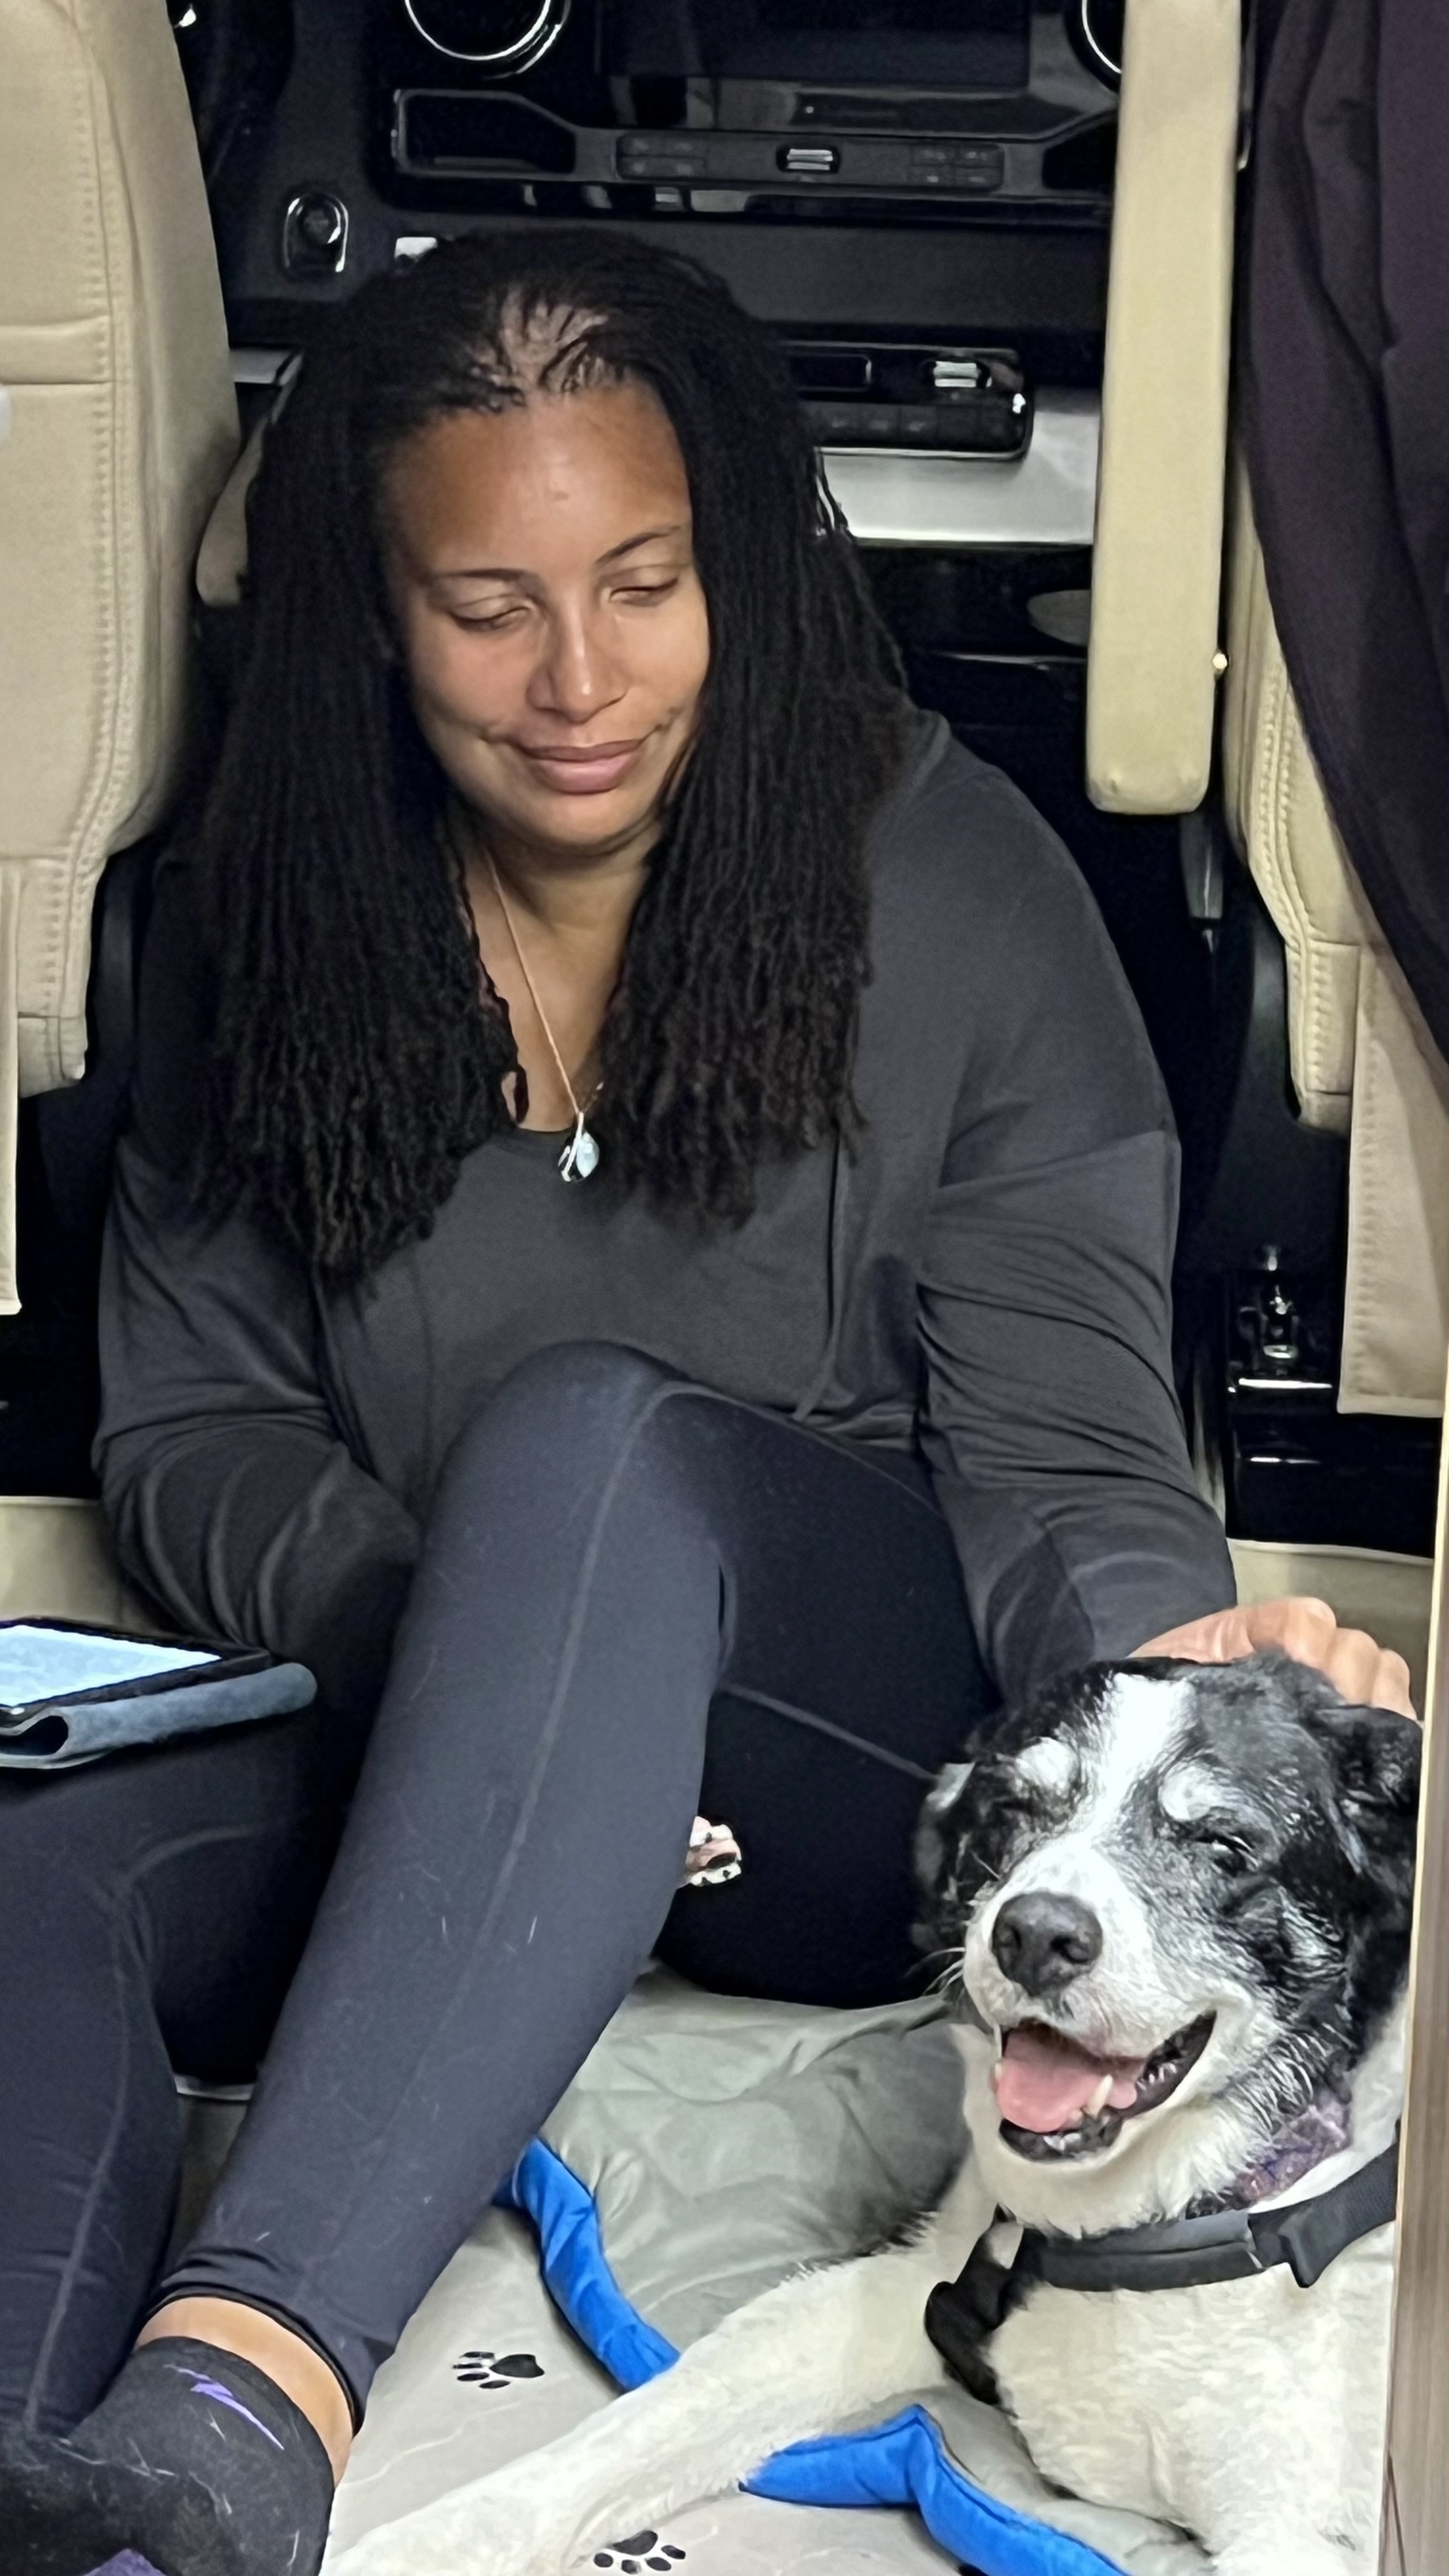 Brown woman with sisterlocks dressed in grey and black sitting next to and petting to a black and white border collie who appears to be smiling at the camera. 